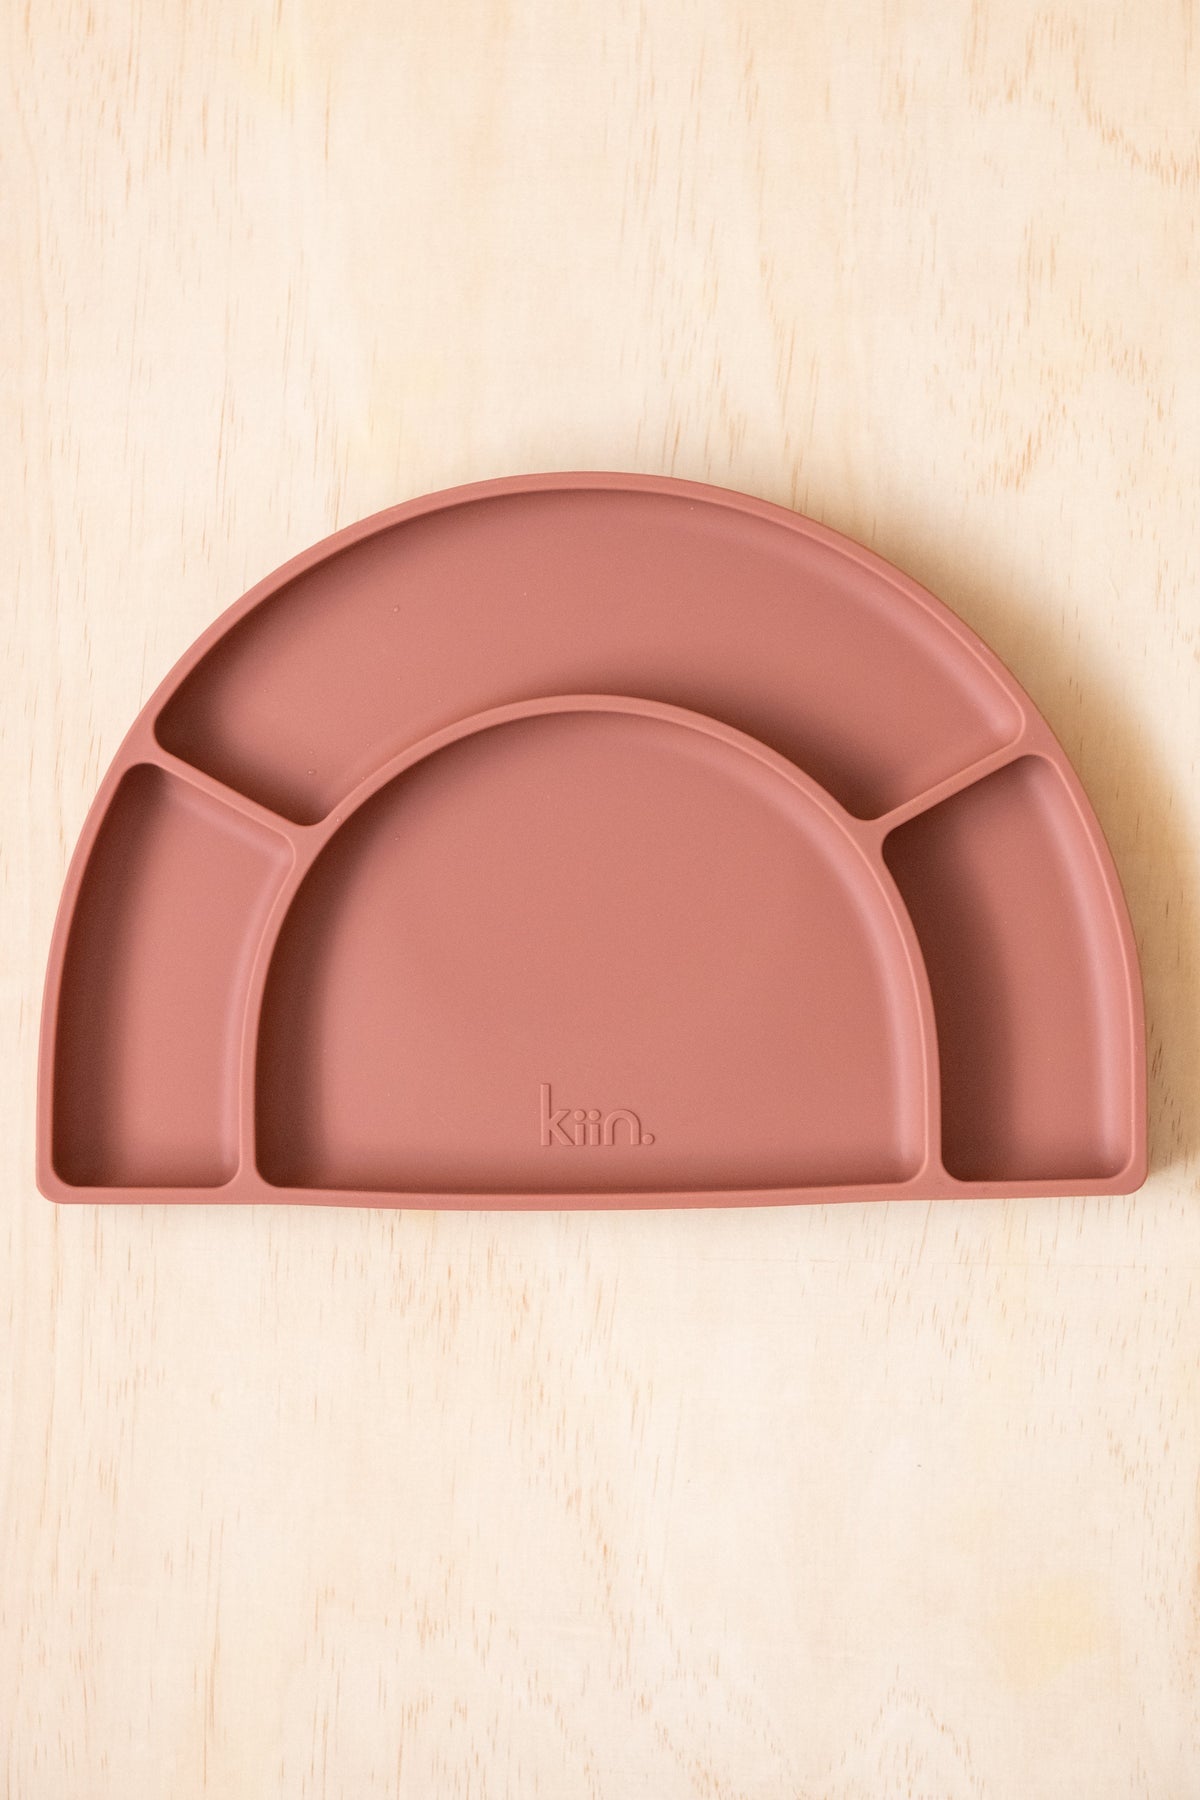 Kiin - Silicone Divided Plate (Rosewood)